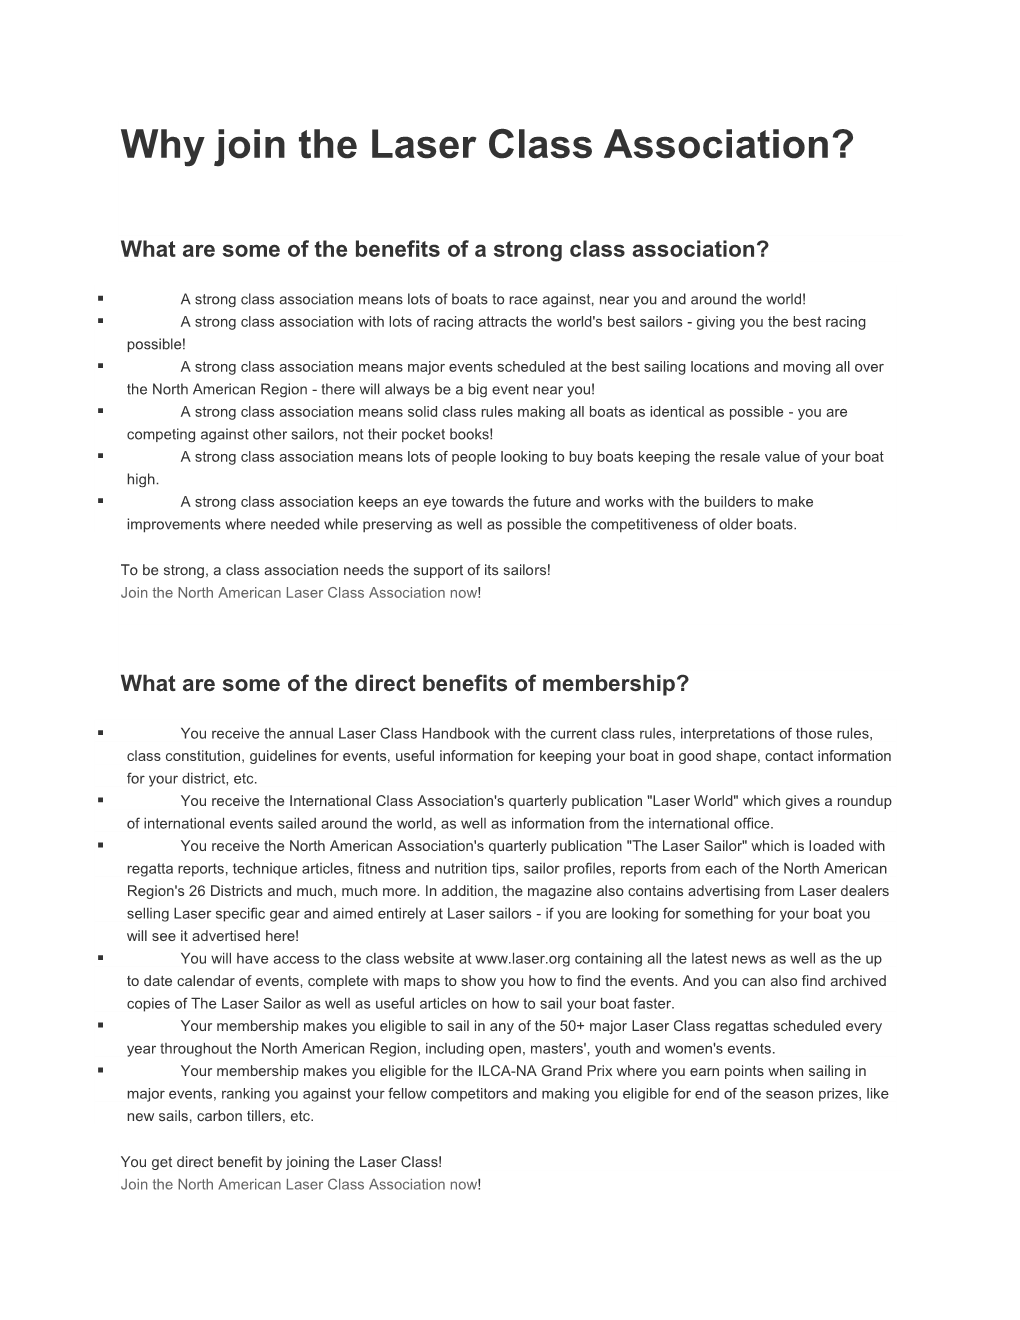 Why Join the Laser Class Association?